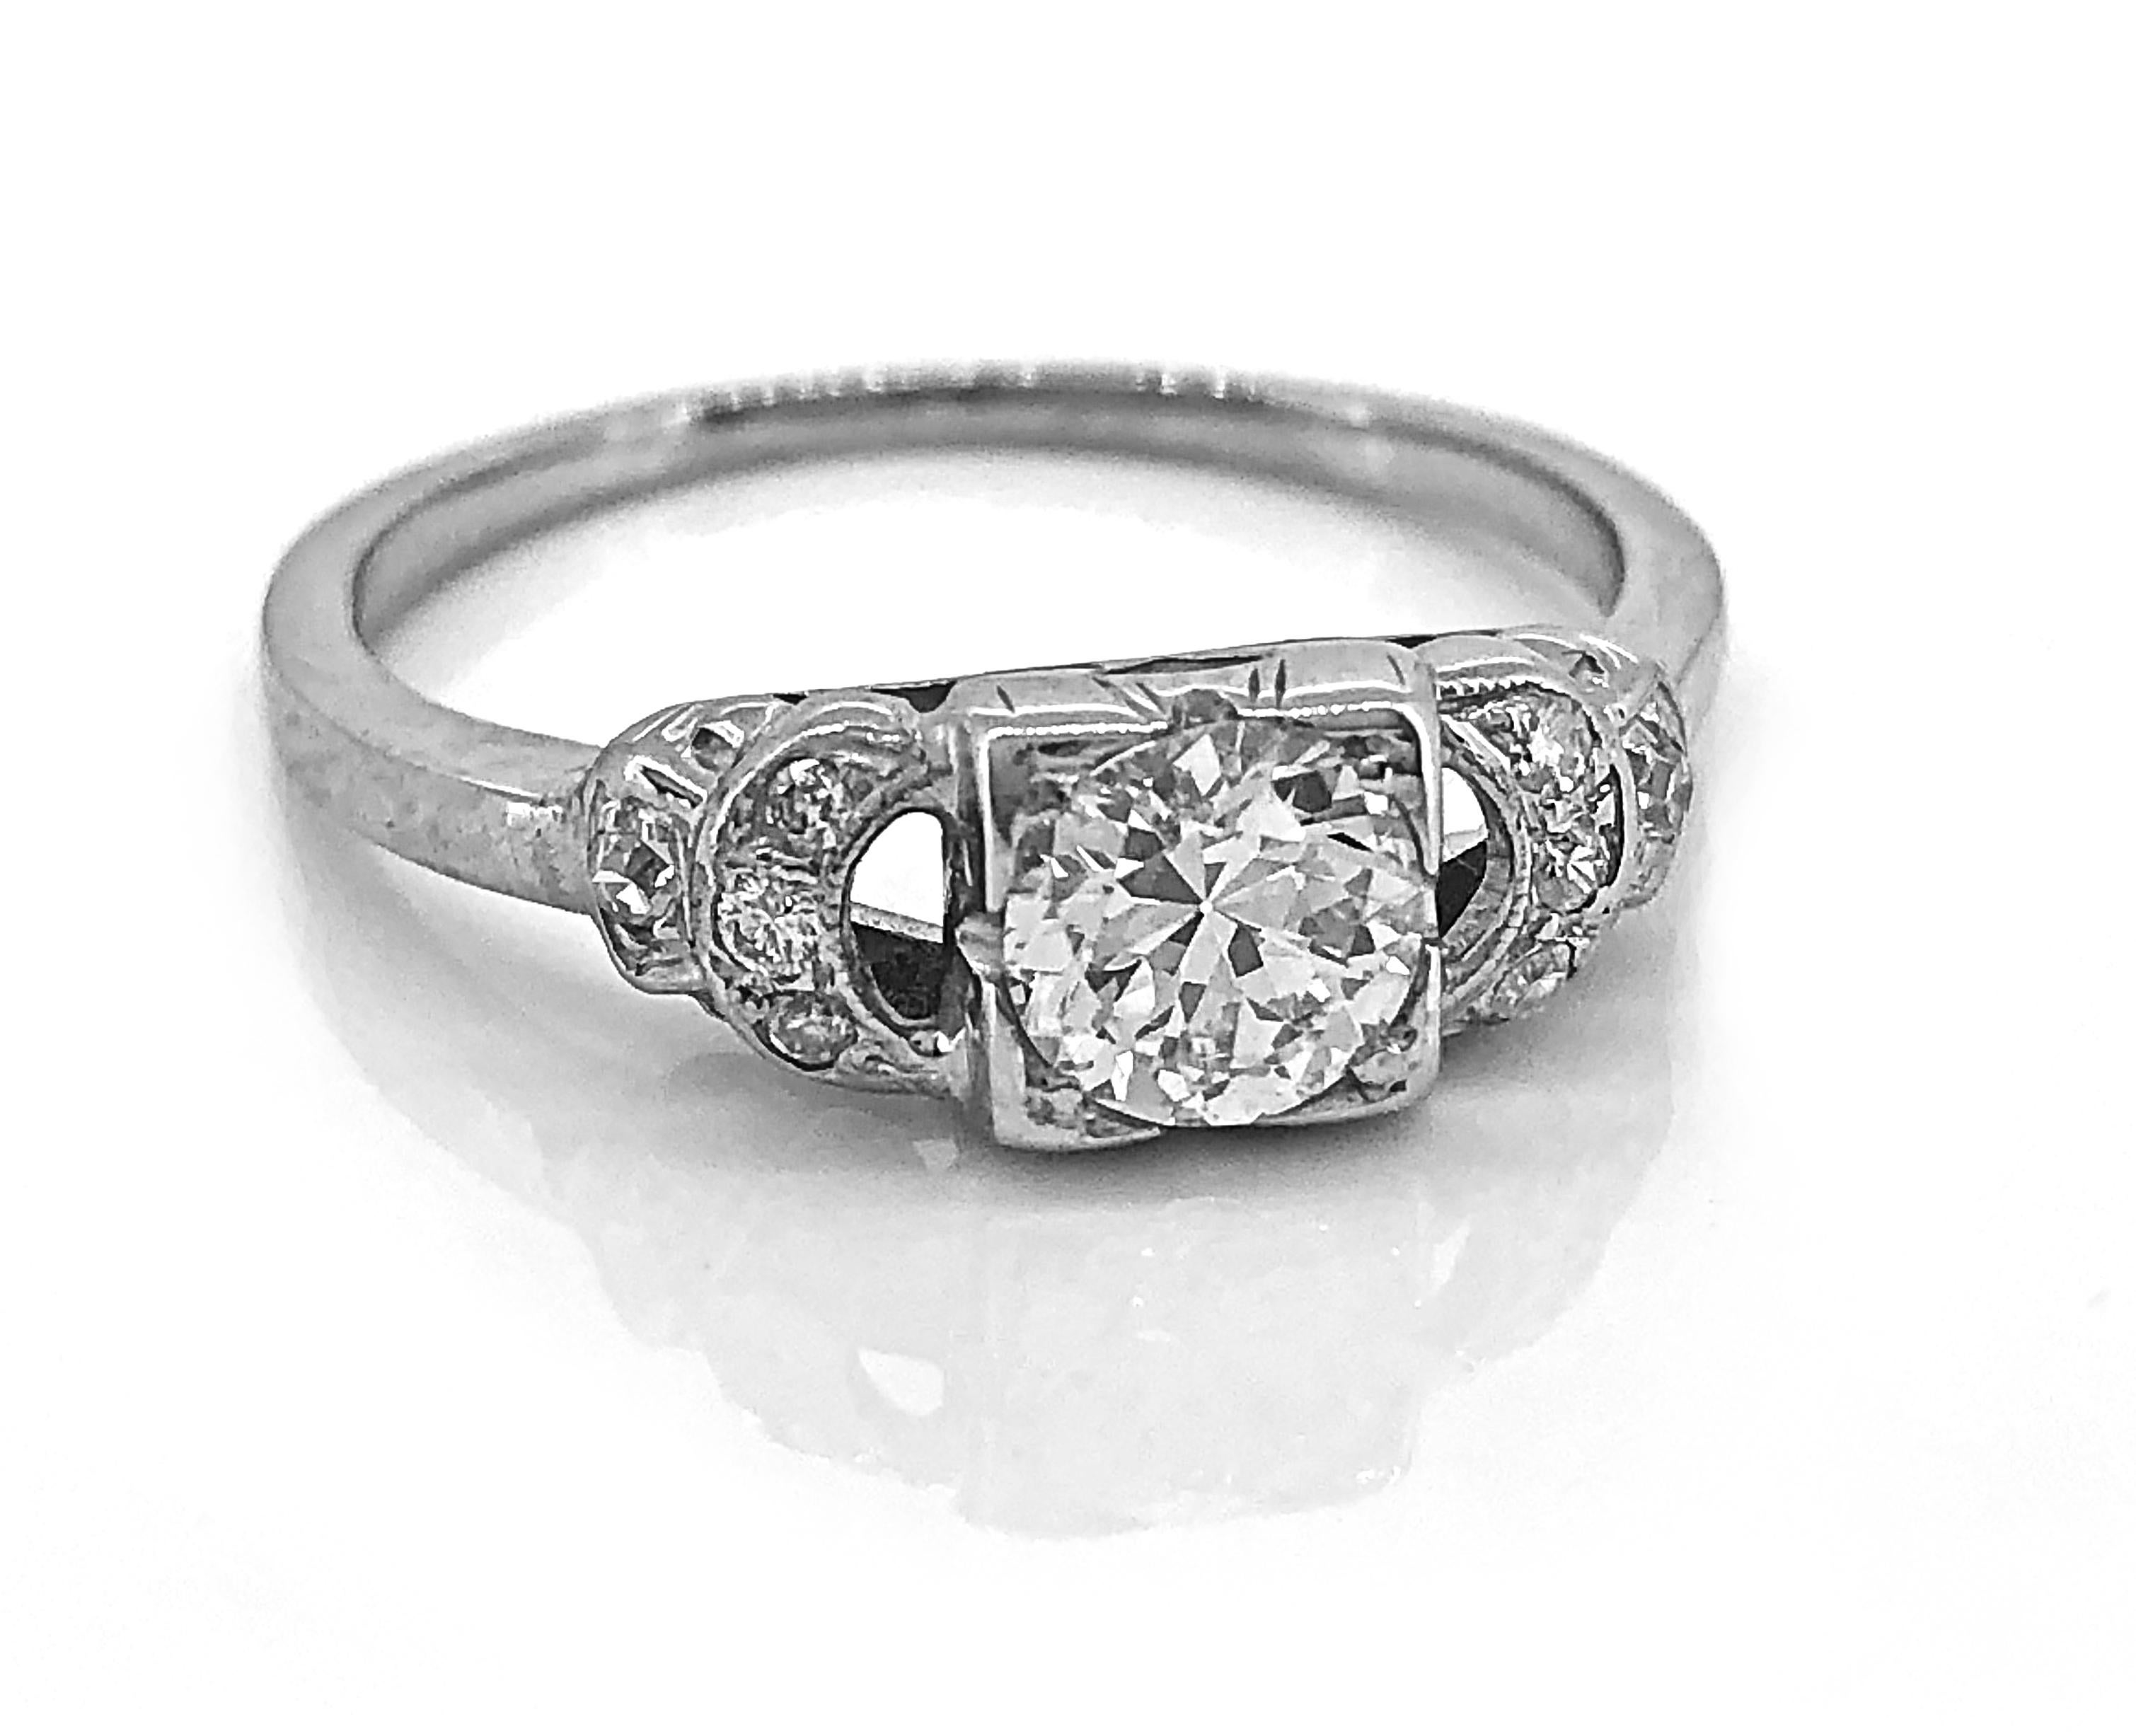 This Art Deco diamond antique engagement ring is crafted in 14K white gold. This ring features a .50ct. apx. diamond with VS2-SI1 clarity and G-H color. The center diamond is accompanied by .05ct. apx. T.W. of diamond melee. The ring is beautifully